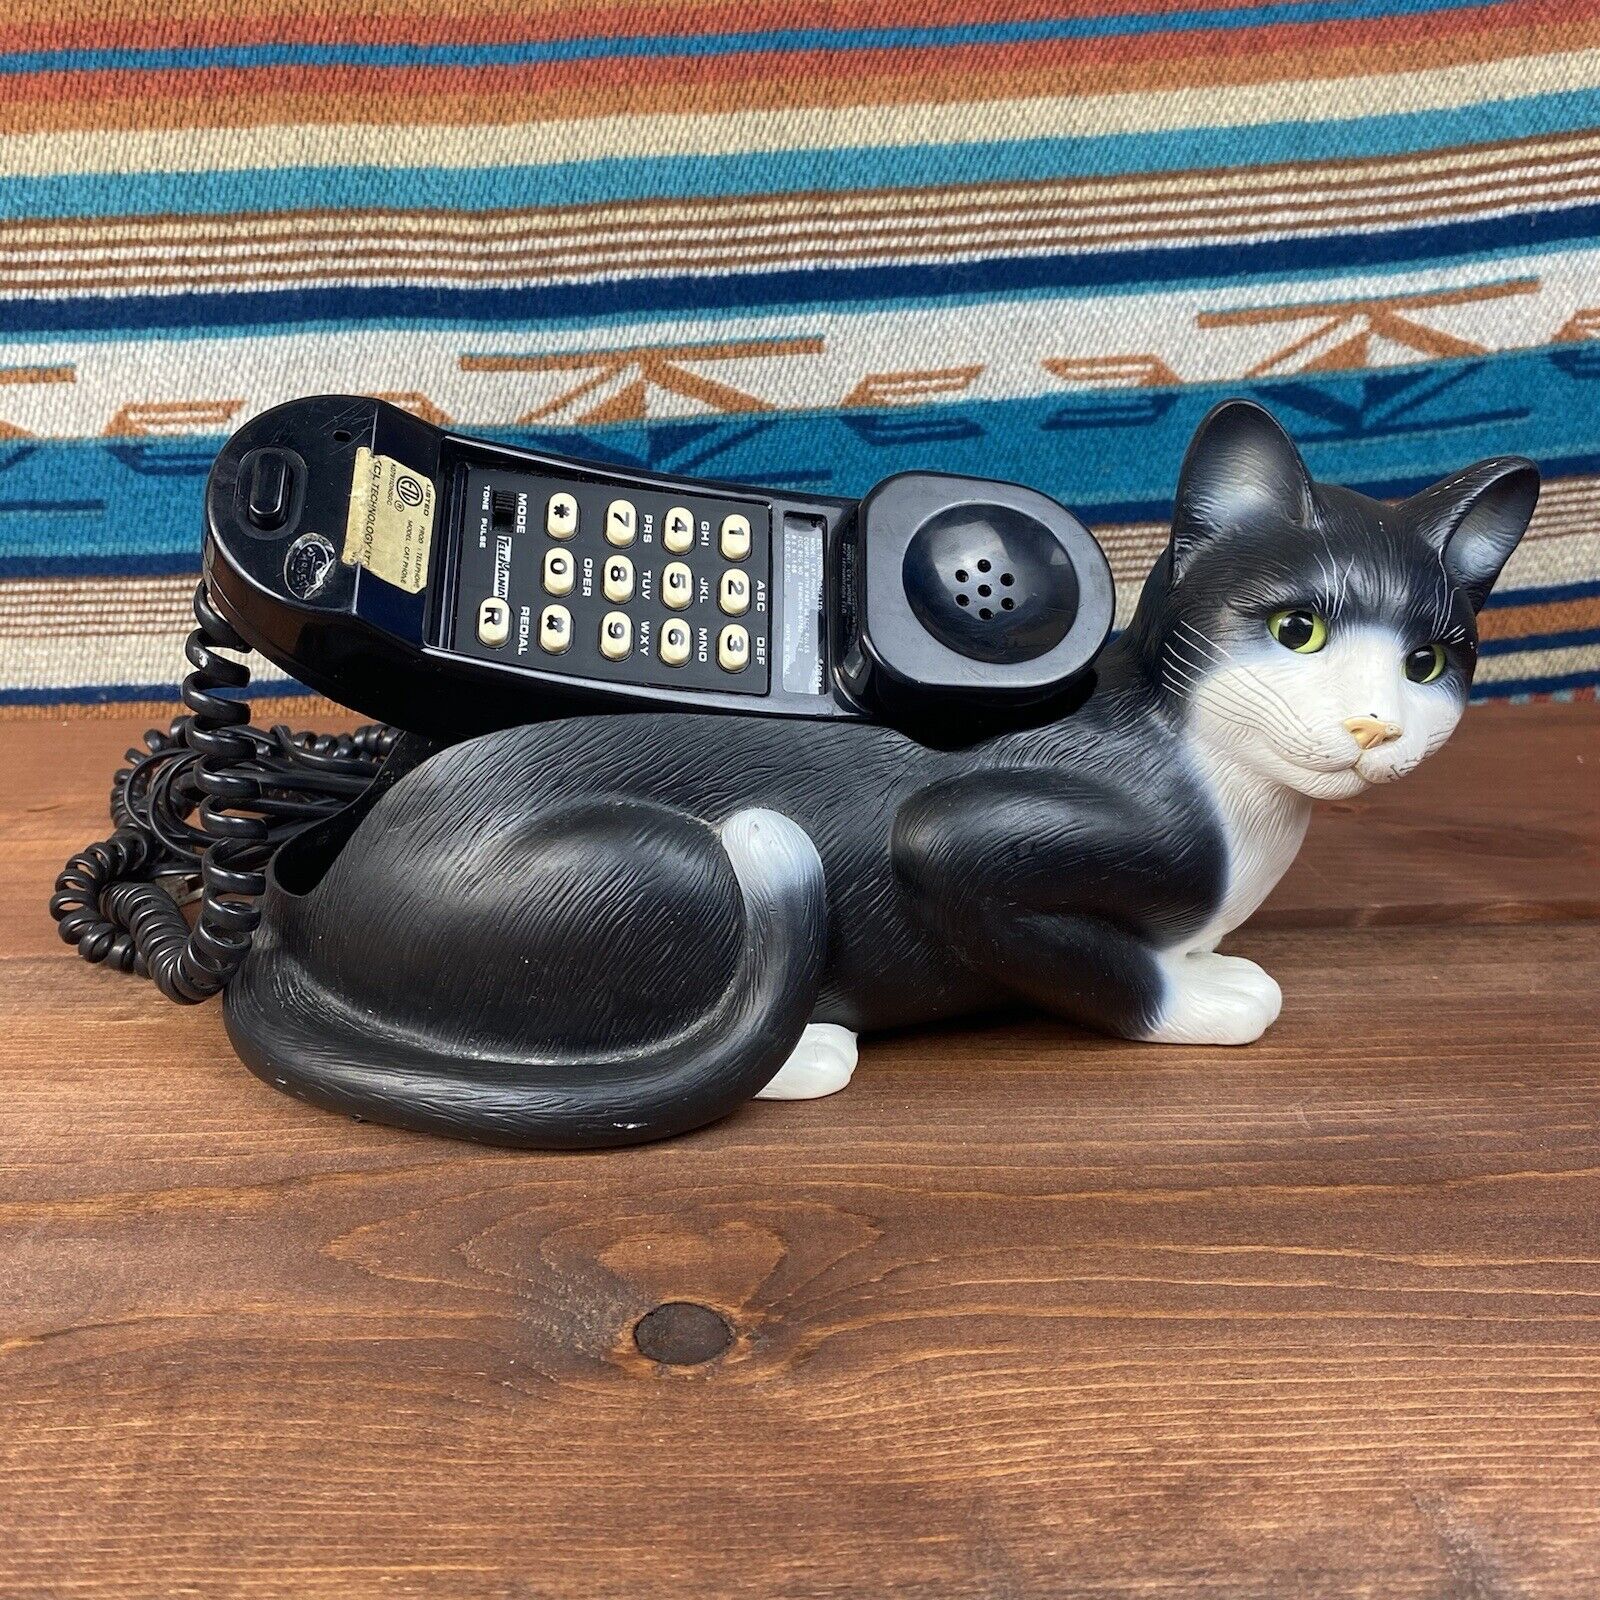 Vintage Telemania Cat Phone Antique Art Home Decor Corded Tested Working